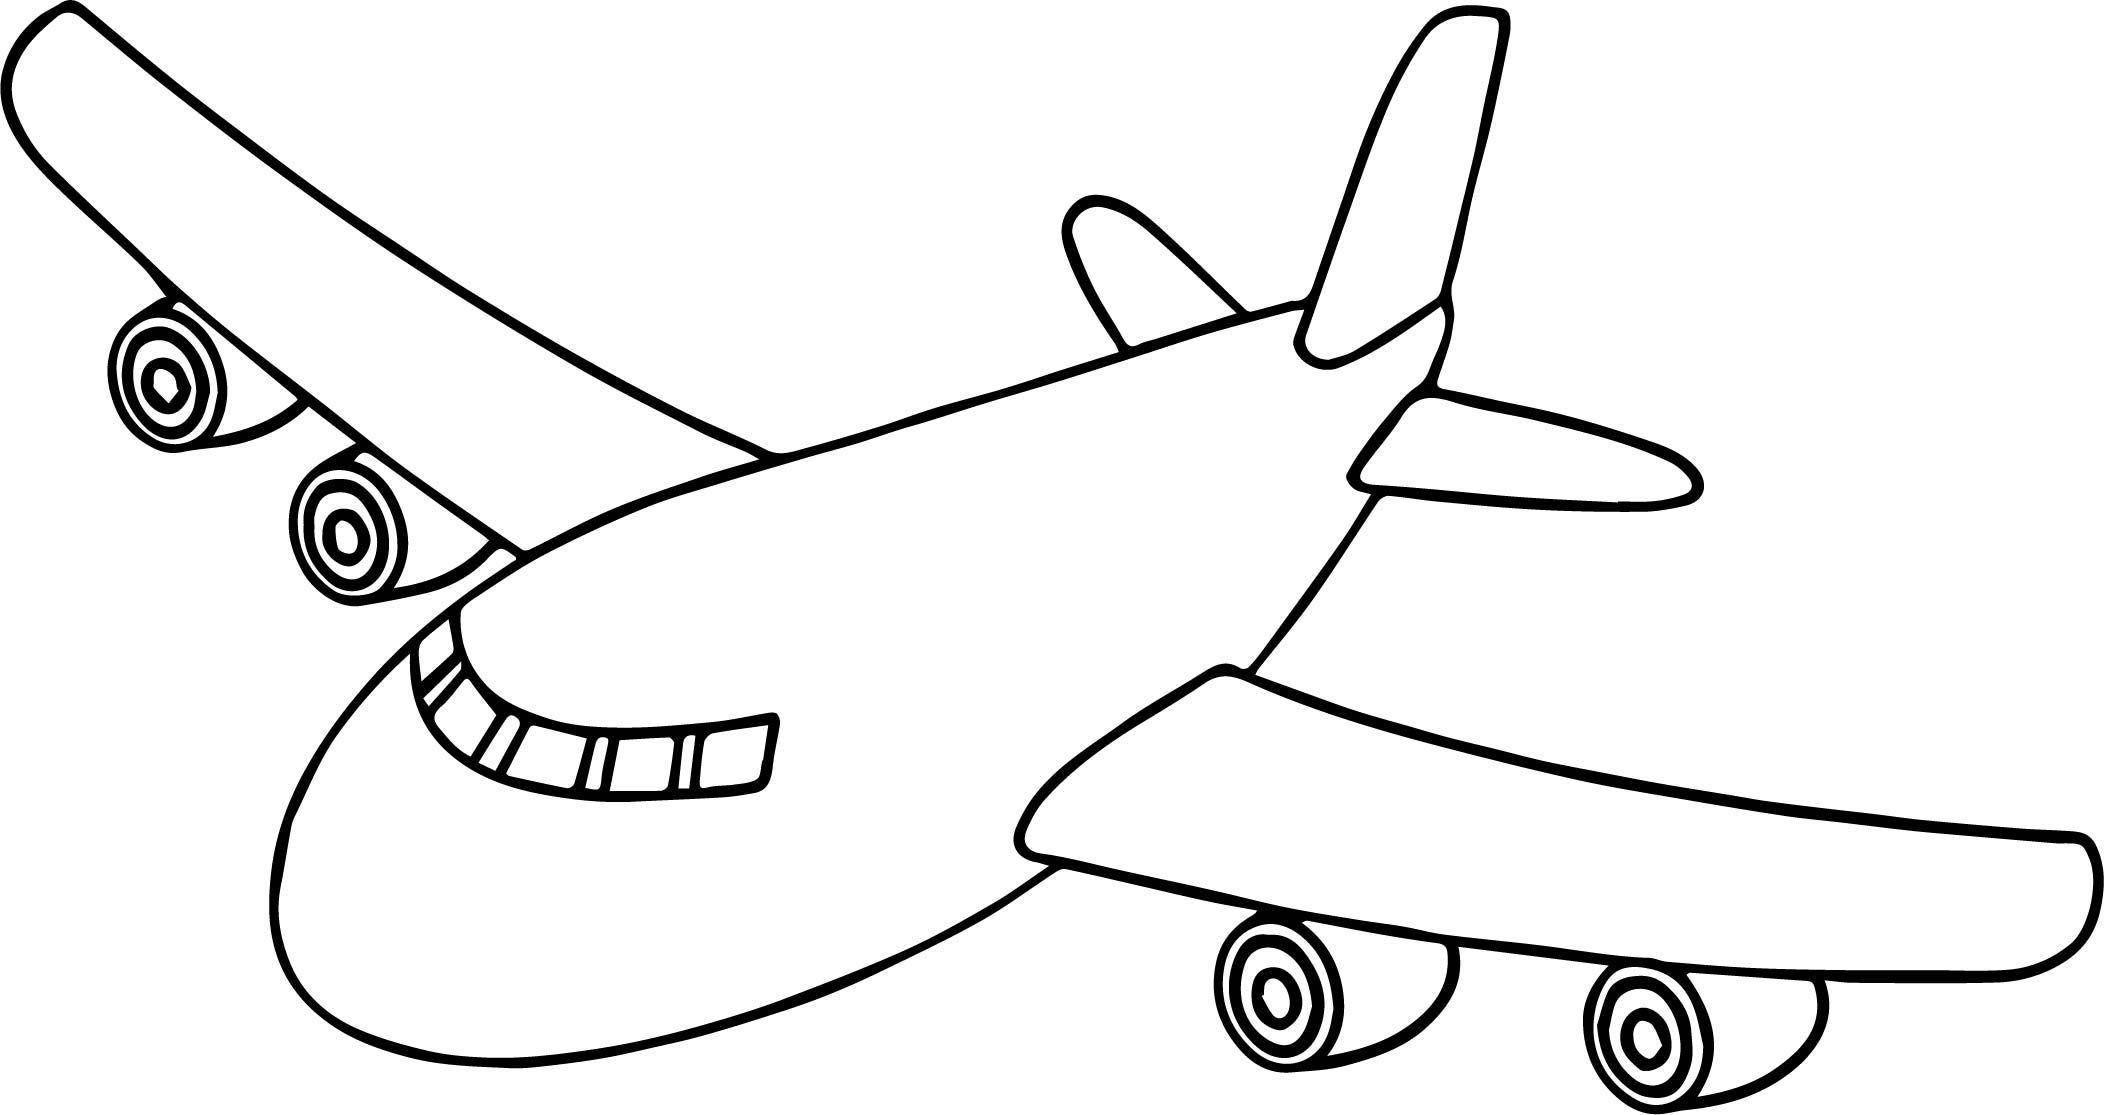 Front Airplane Coloring Page Airplane coloring pages, Cartoon